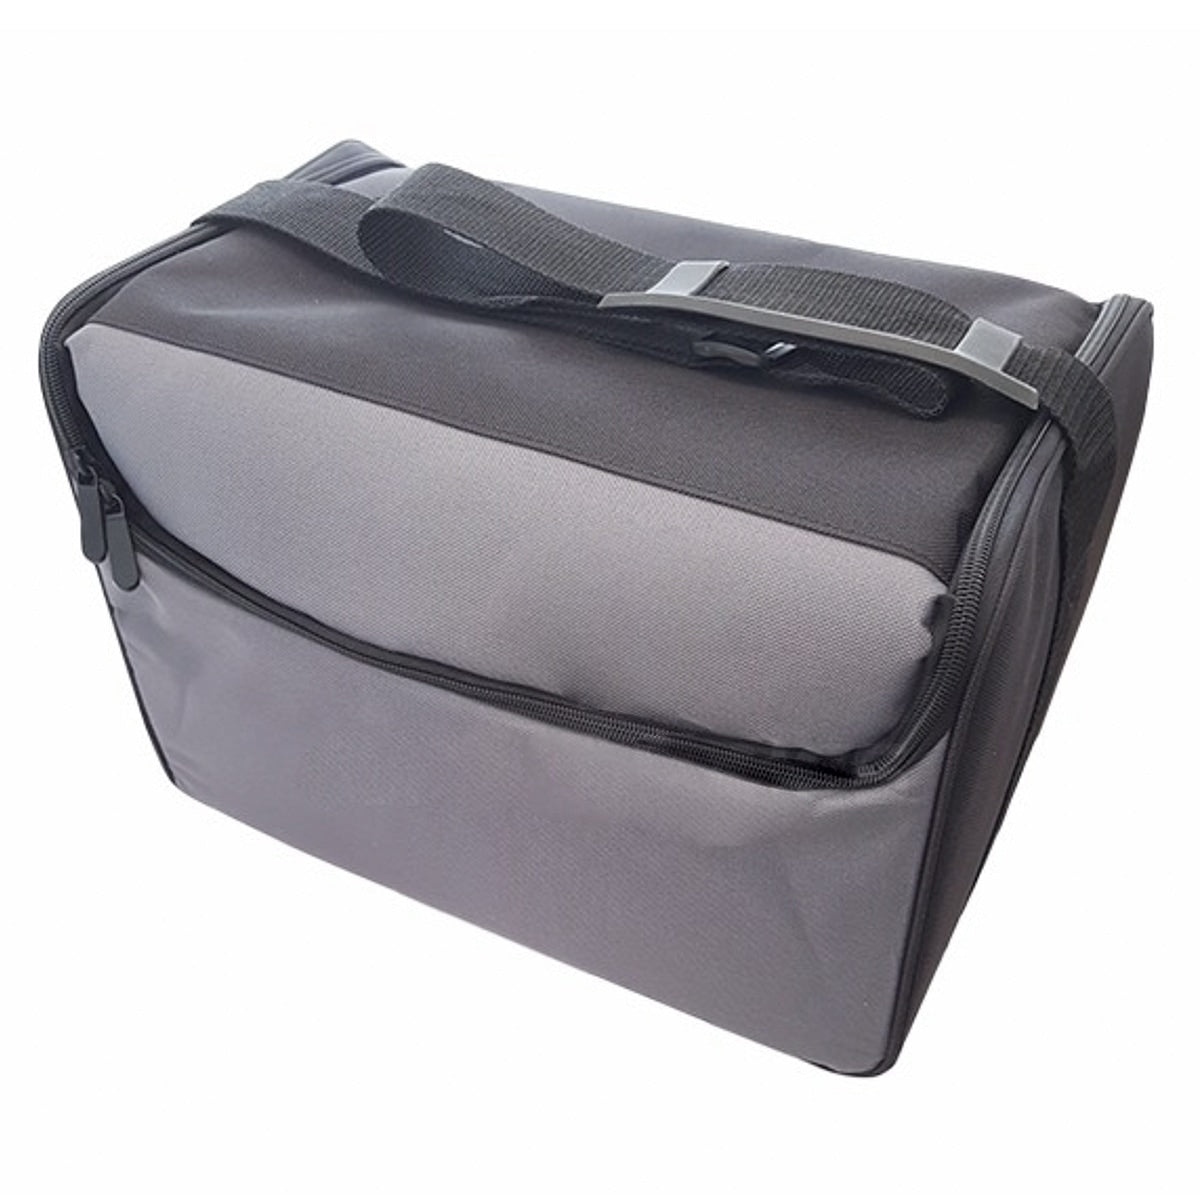 Carrying Case for Luna II Series CPAP & BiPAP Machines